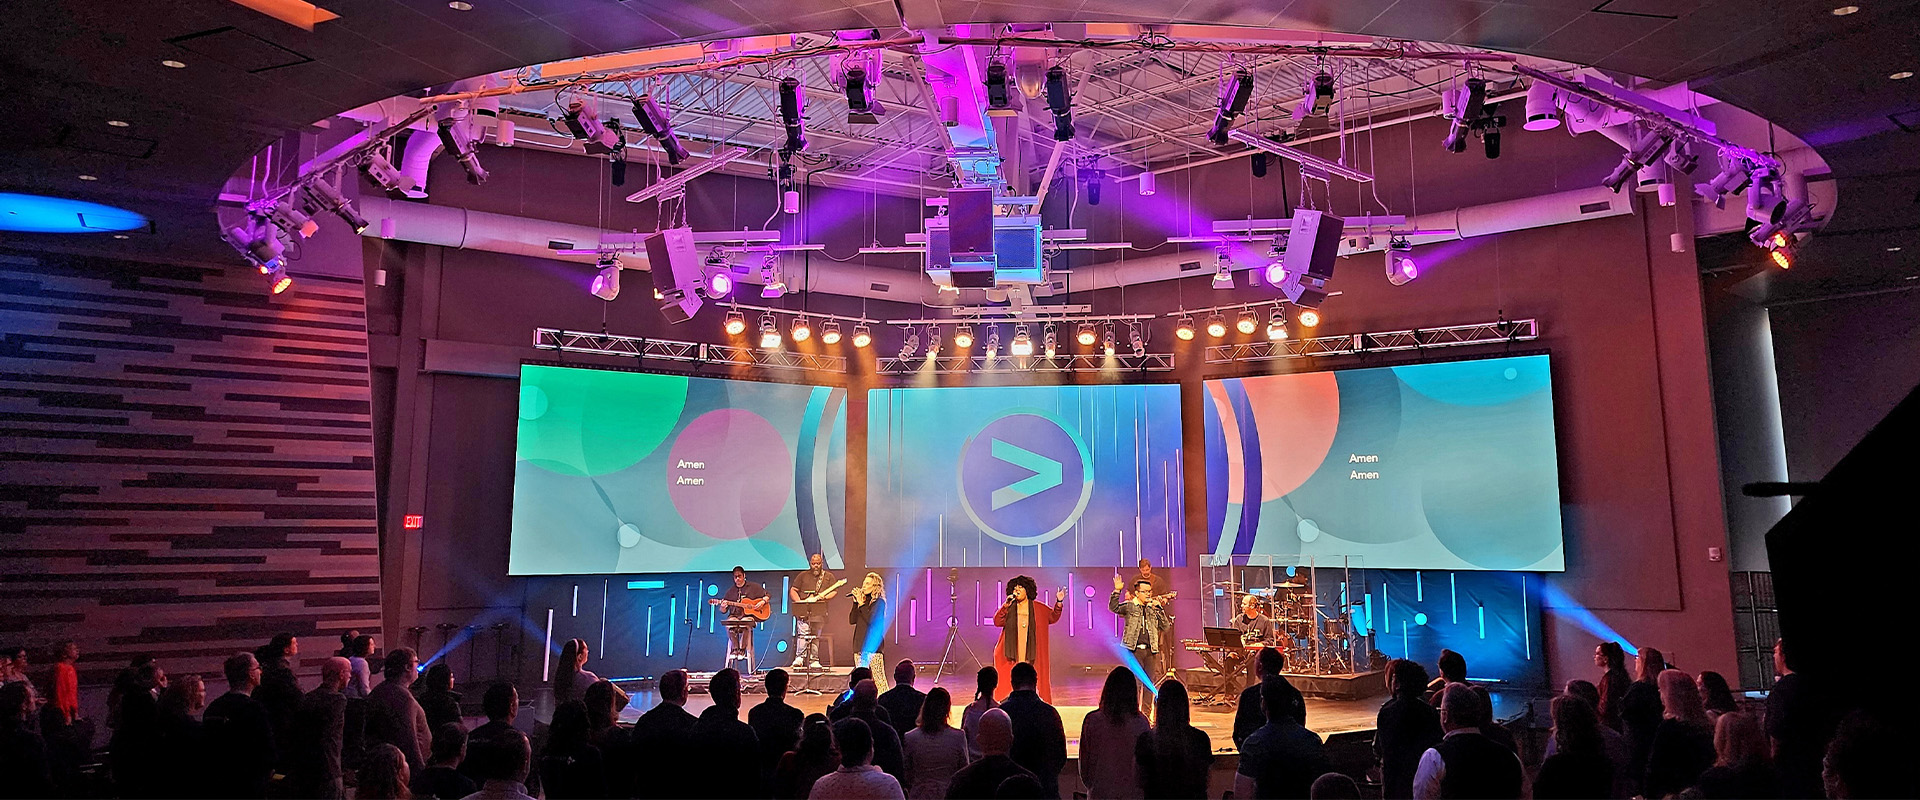 Church Stage Design Ideas. - Contemporary - Other - by Justadial  International | Houzz UK